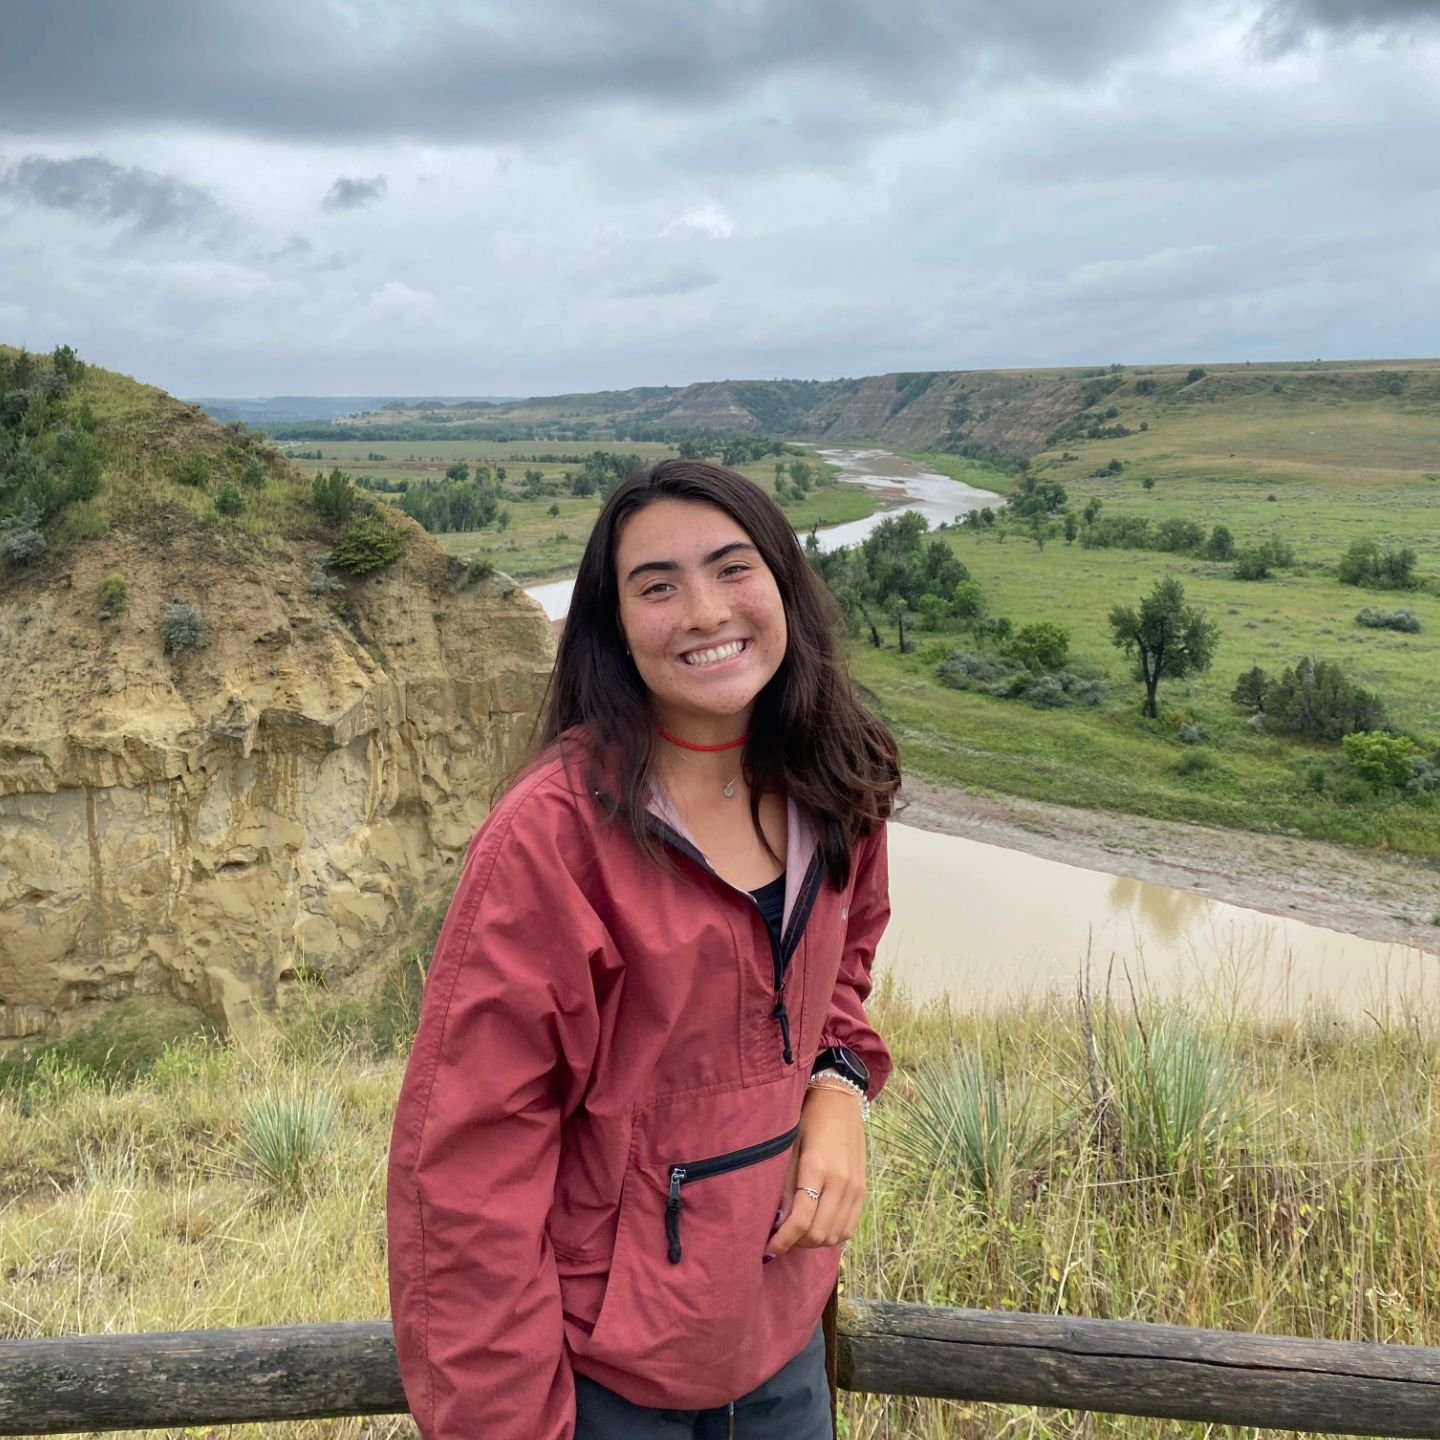 Let's hear it for Jaden Nguyen! 🙌🙌
Jaden is one of our experienced guides who will be returning to lead a first-session expedition this summer 🌲

AGE:
22

CURRENTLY:
Graduating from Loyola University Chicago and getting ready to start my M.S. in F